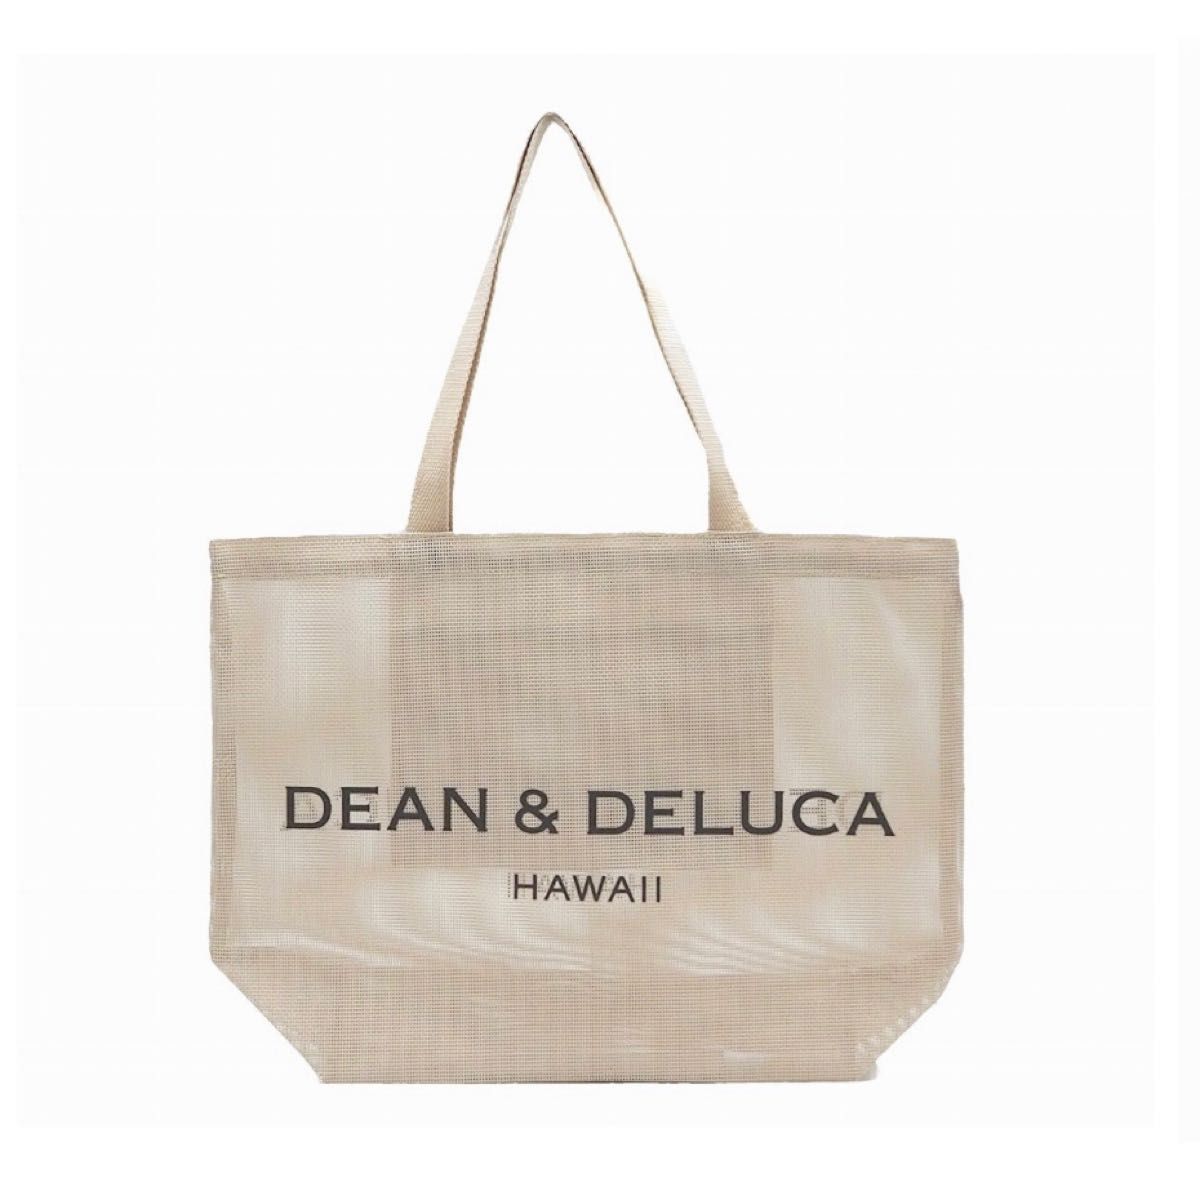 DEAN&DELUCA トートバッグ 限定 ディーン&デルーカ エコバッグ